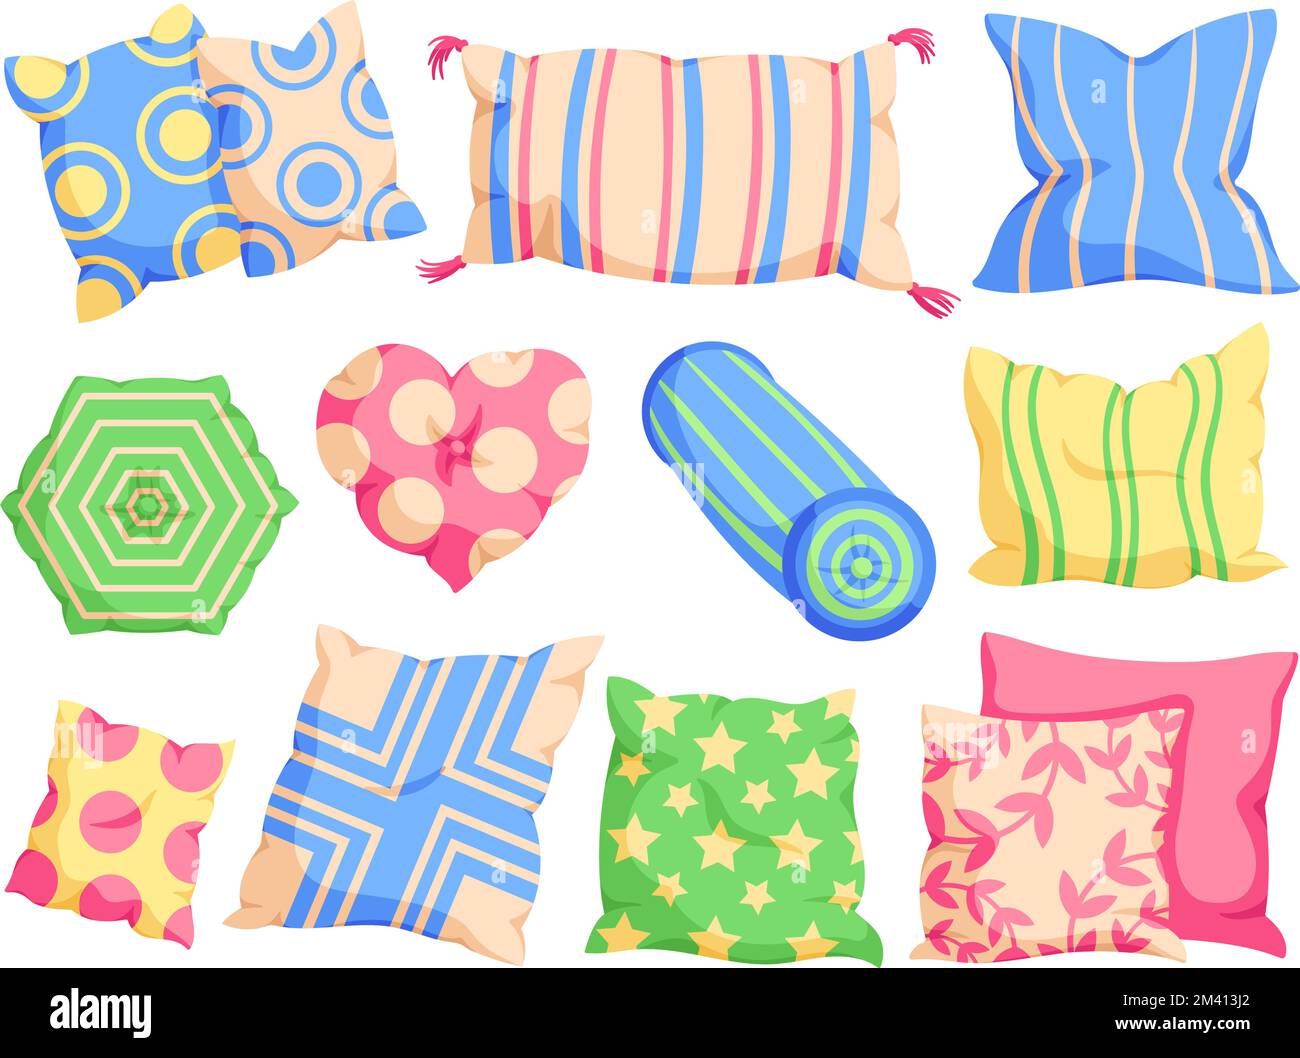 Cartoon cushion. Comfy pillow for bed and couch, bedroom textile and different shape pillows vector set Stock Vector